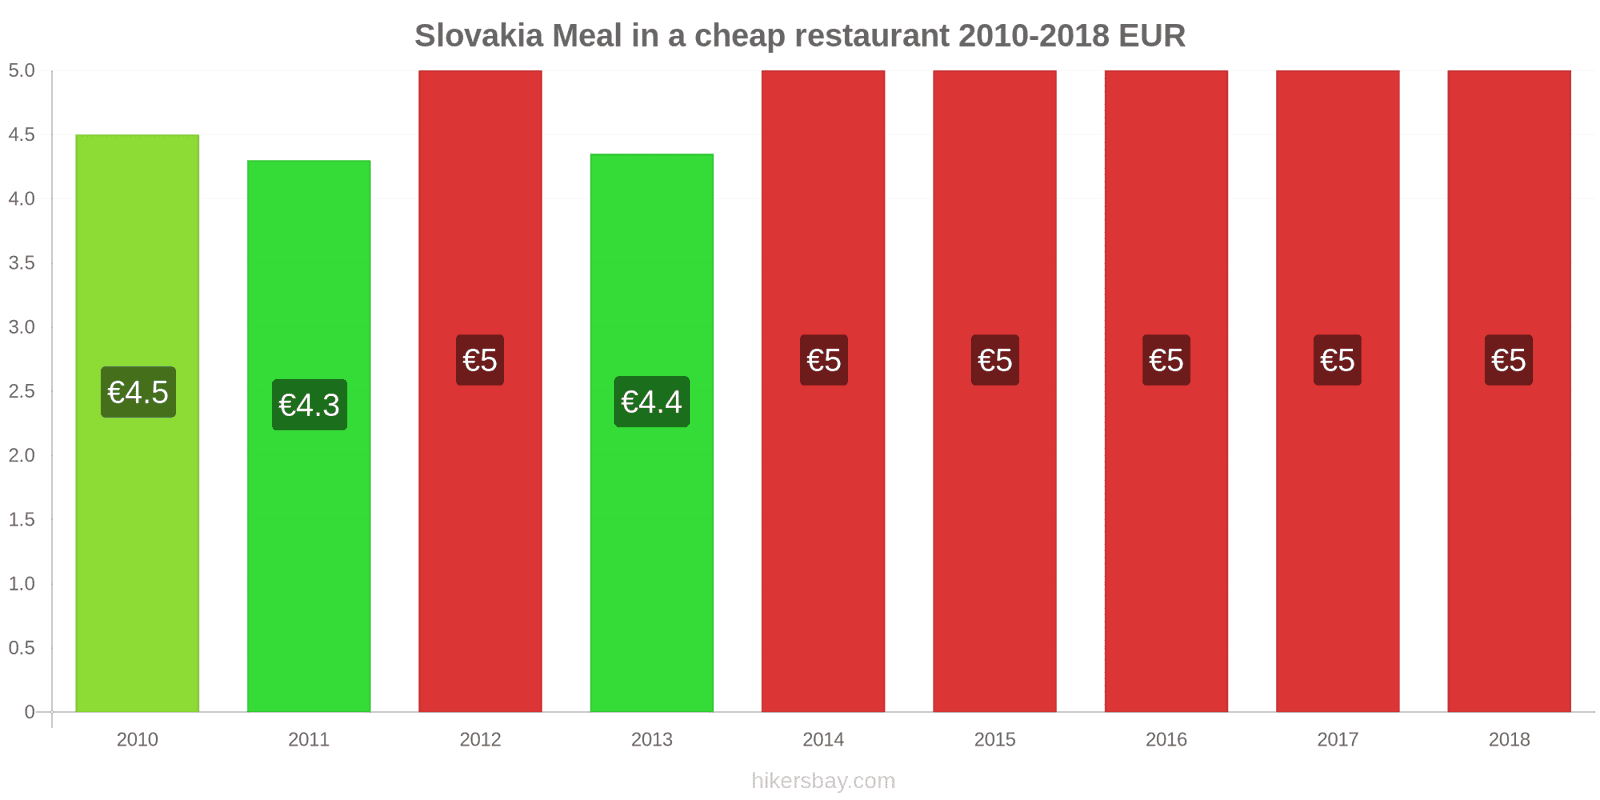 Slovakia price changes Meal in a cheap restaurant hikersbay.com